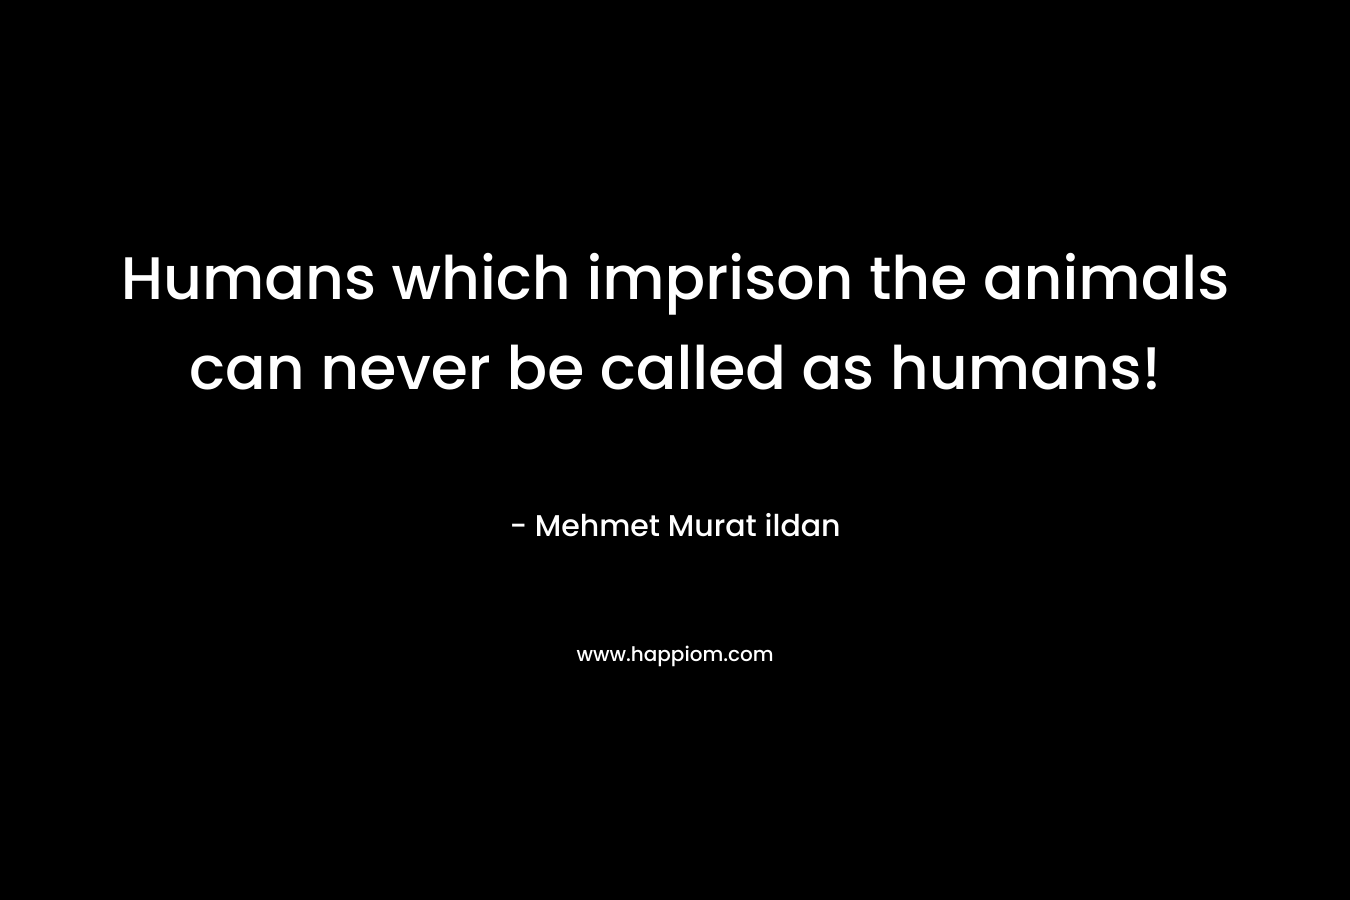 Humans which imprison the animals can never be called as humans!